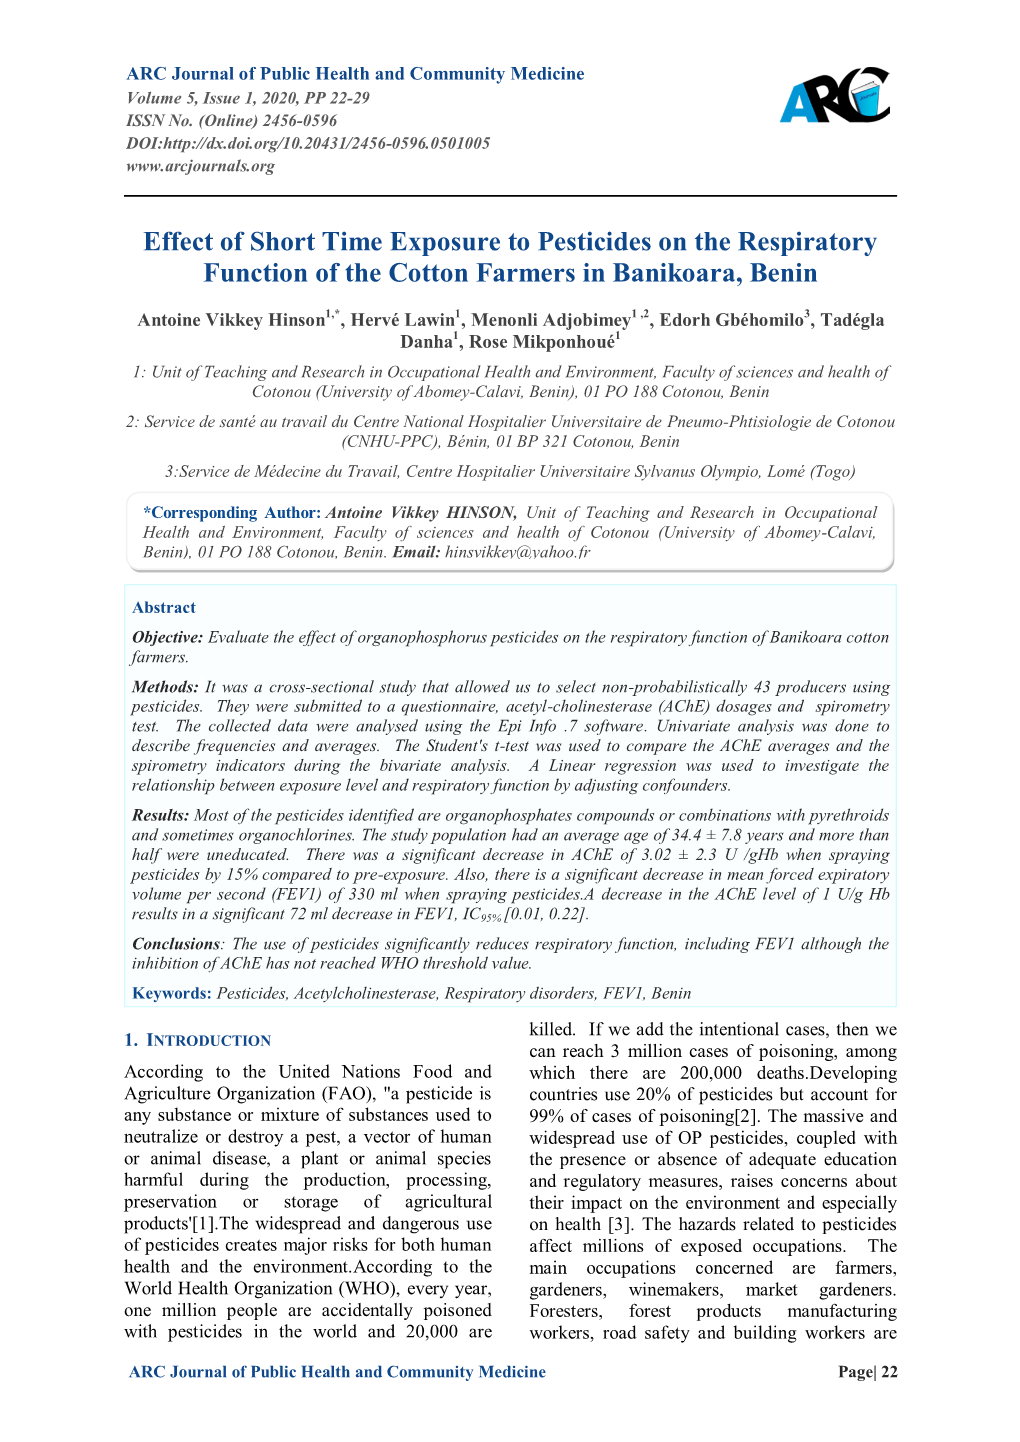 Effect of Short Time Exposure to Pesticides on the Respiratory Function of the Cotton Farmers in Banikoara, Benin